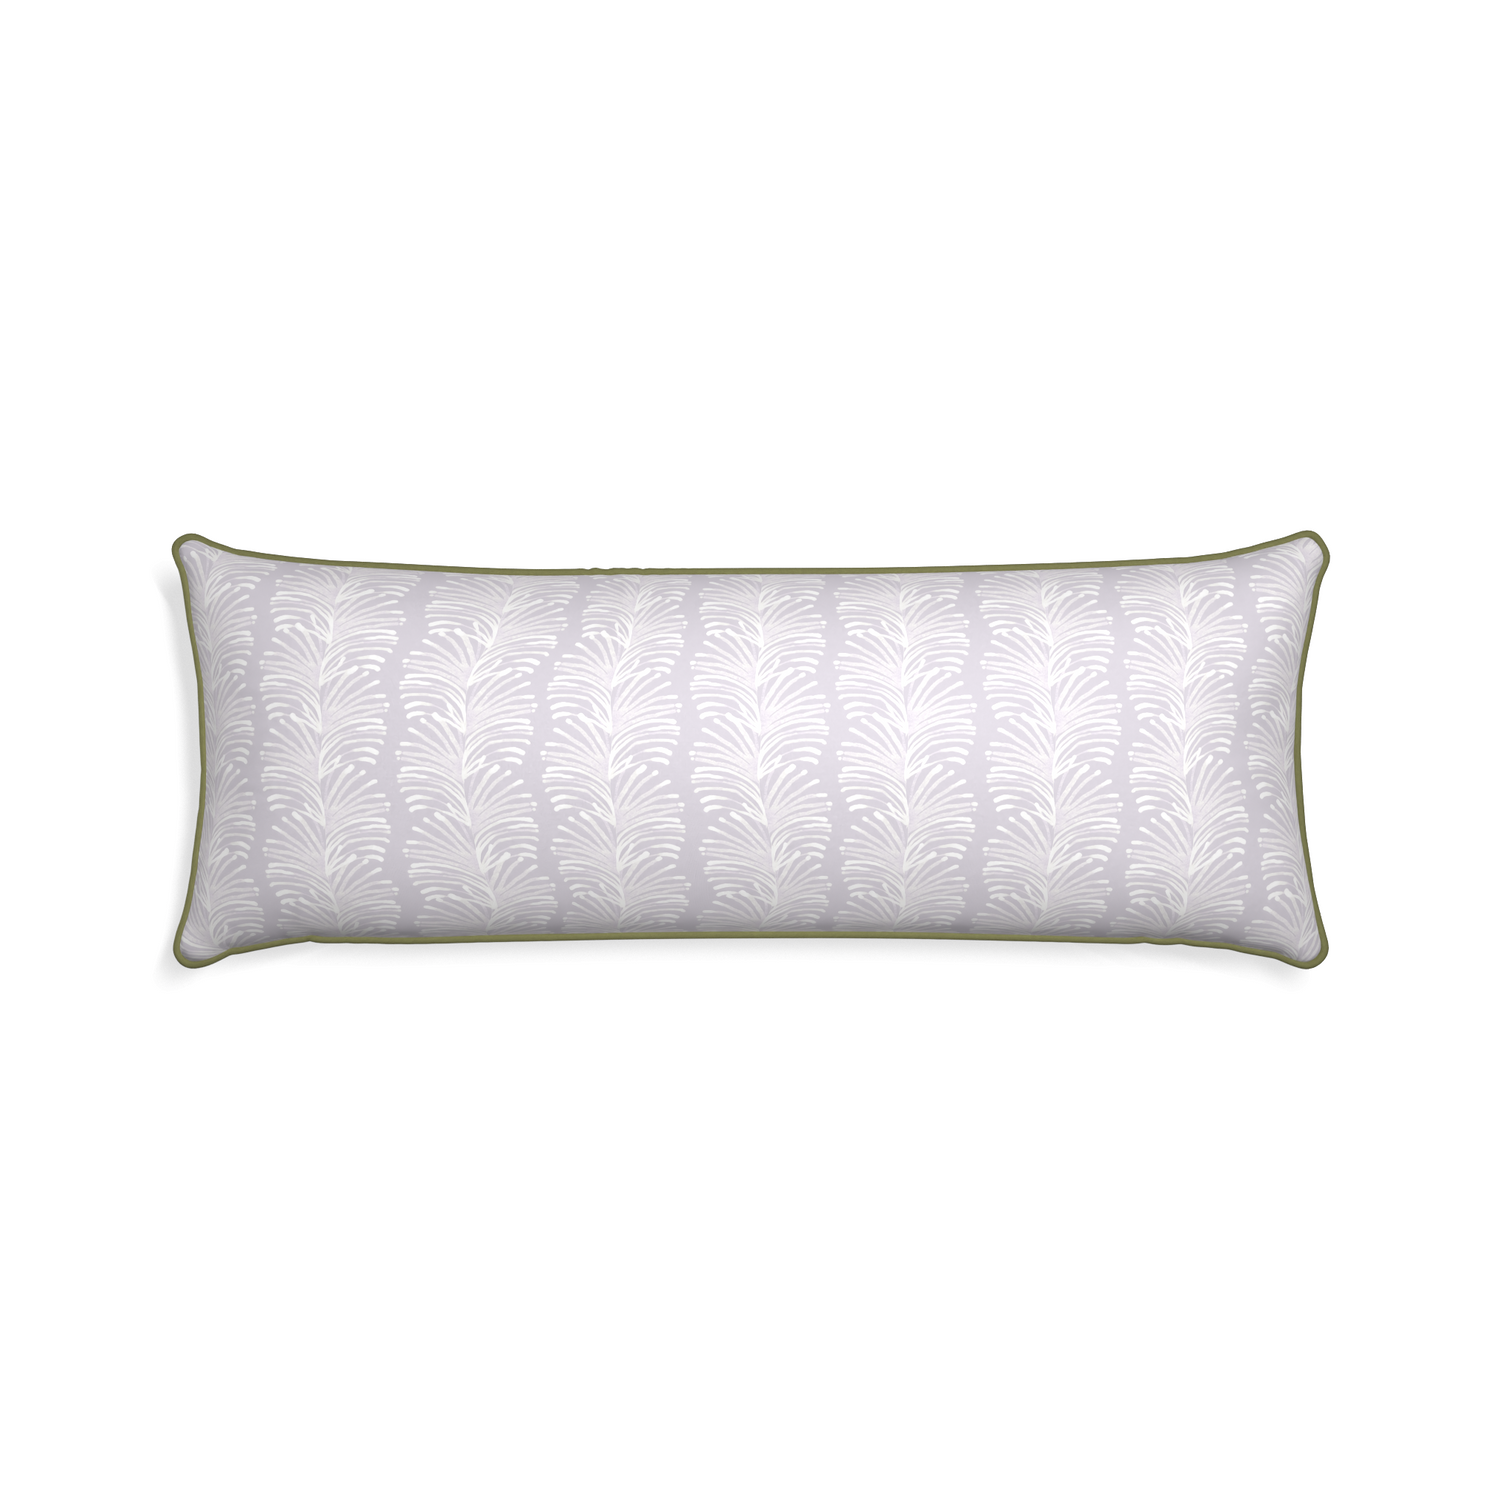 rectangle lavender colored botanical stripe pillow with moss green piping